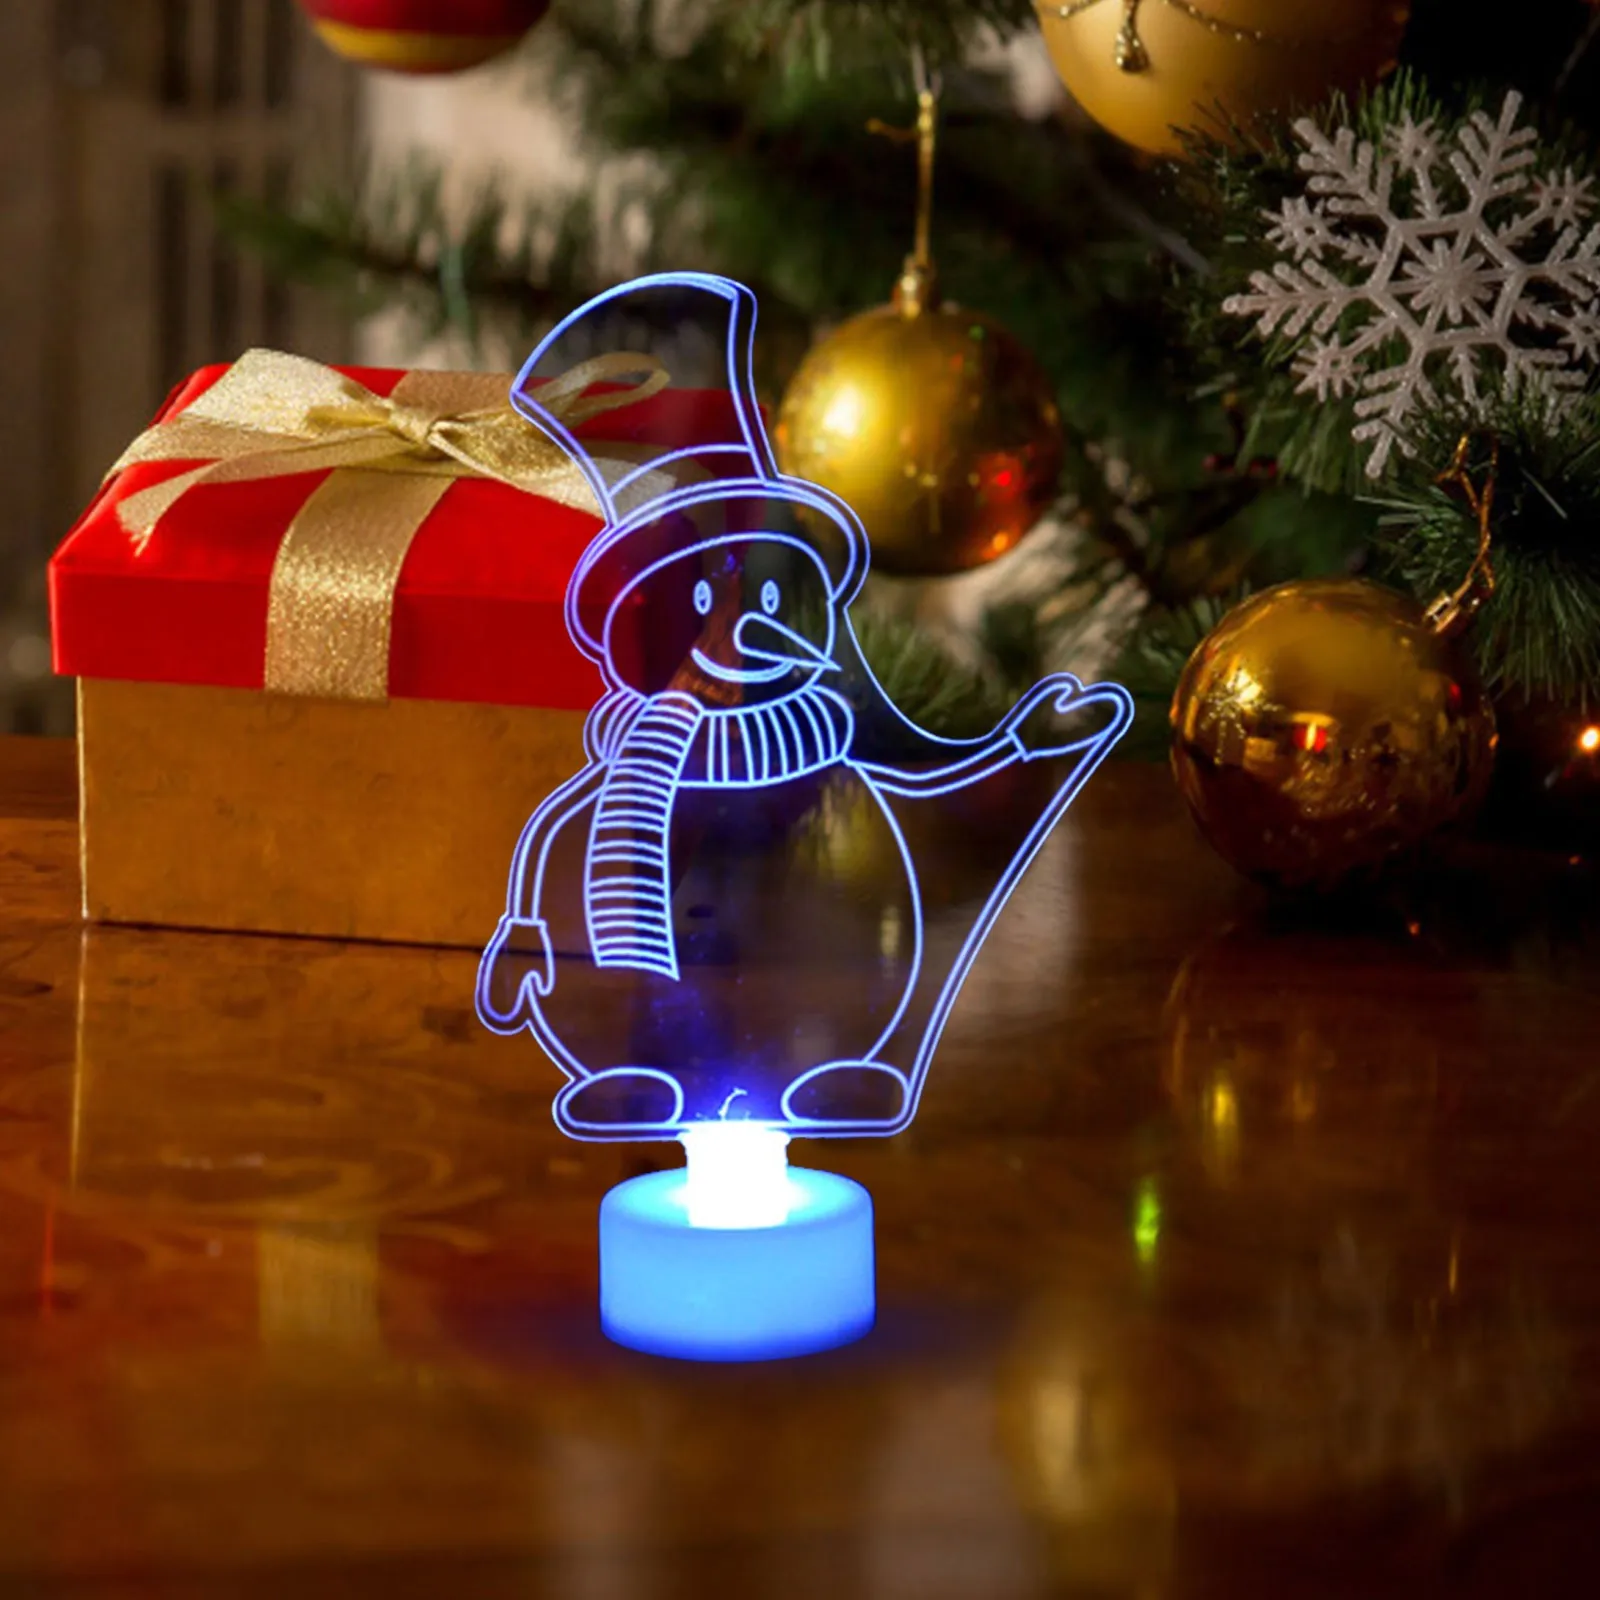 

Colorful LED Decorative Lights New Year Christmas tree Pendant decorations Snowman Santa Claus Light Party supplies Toy gift